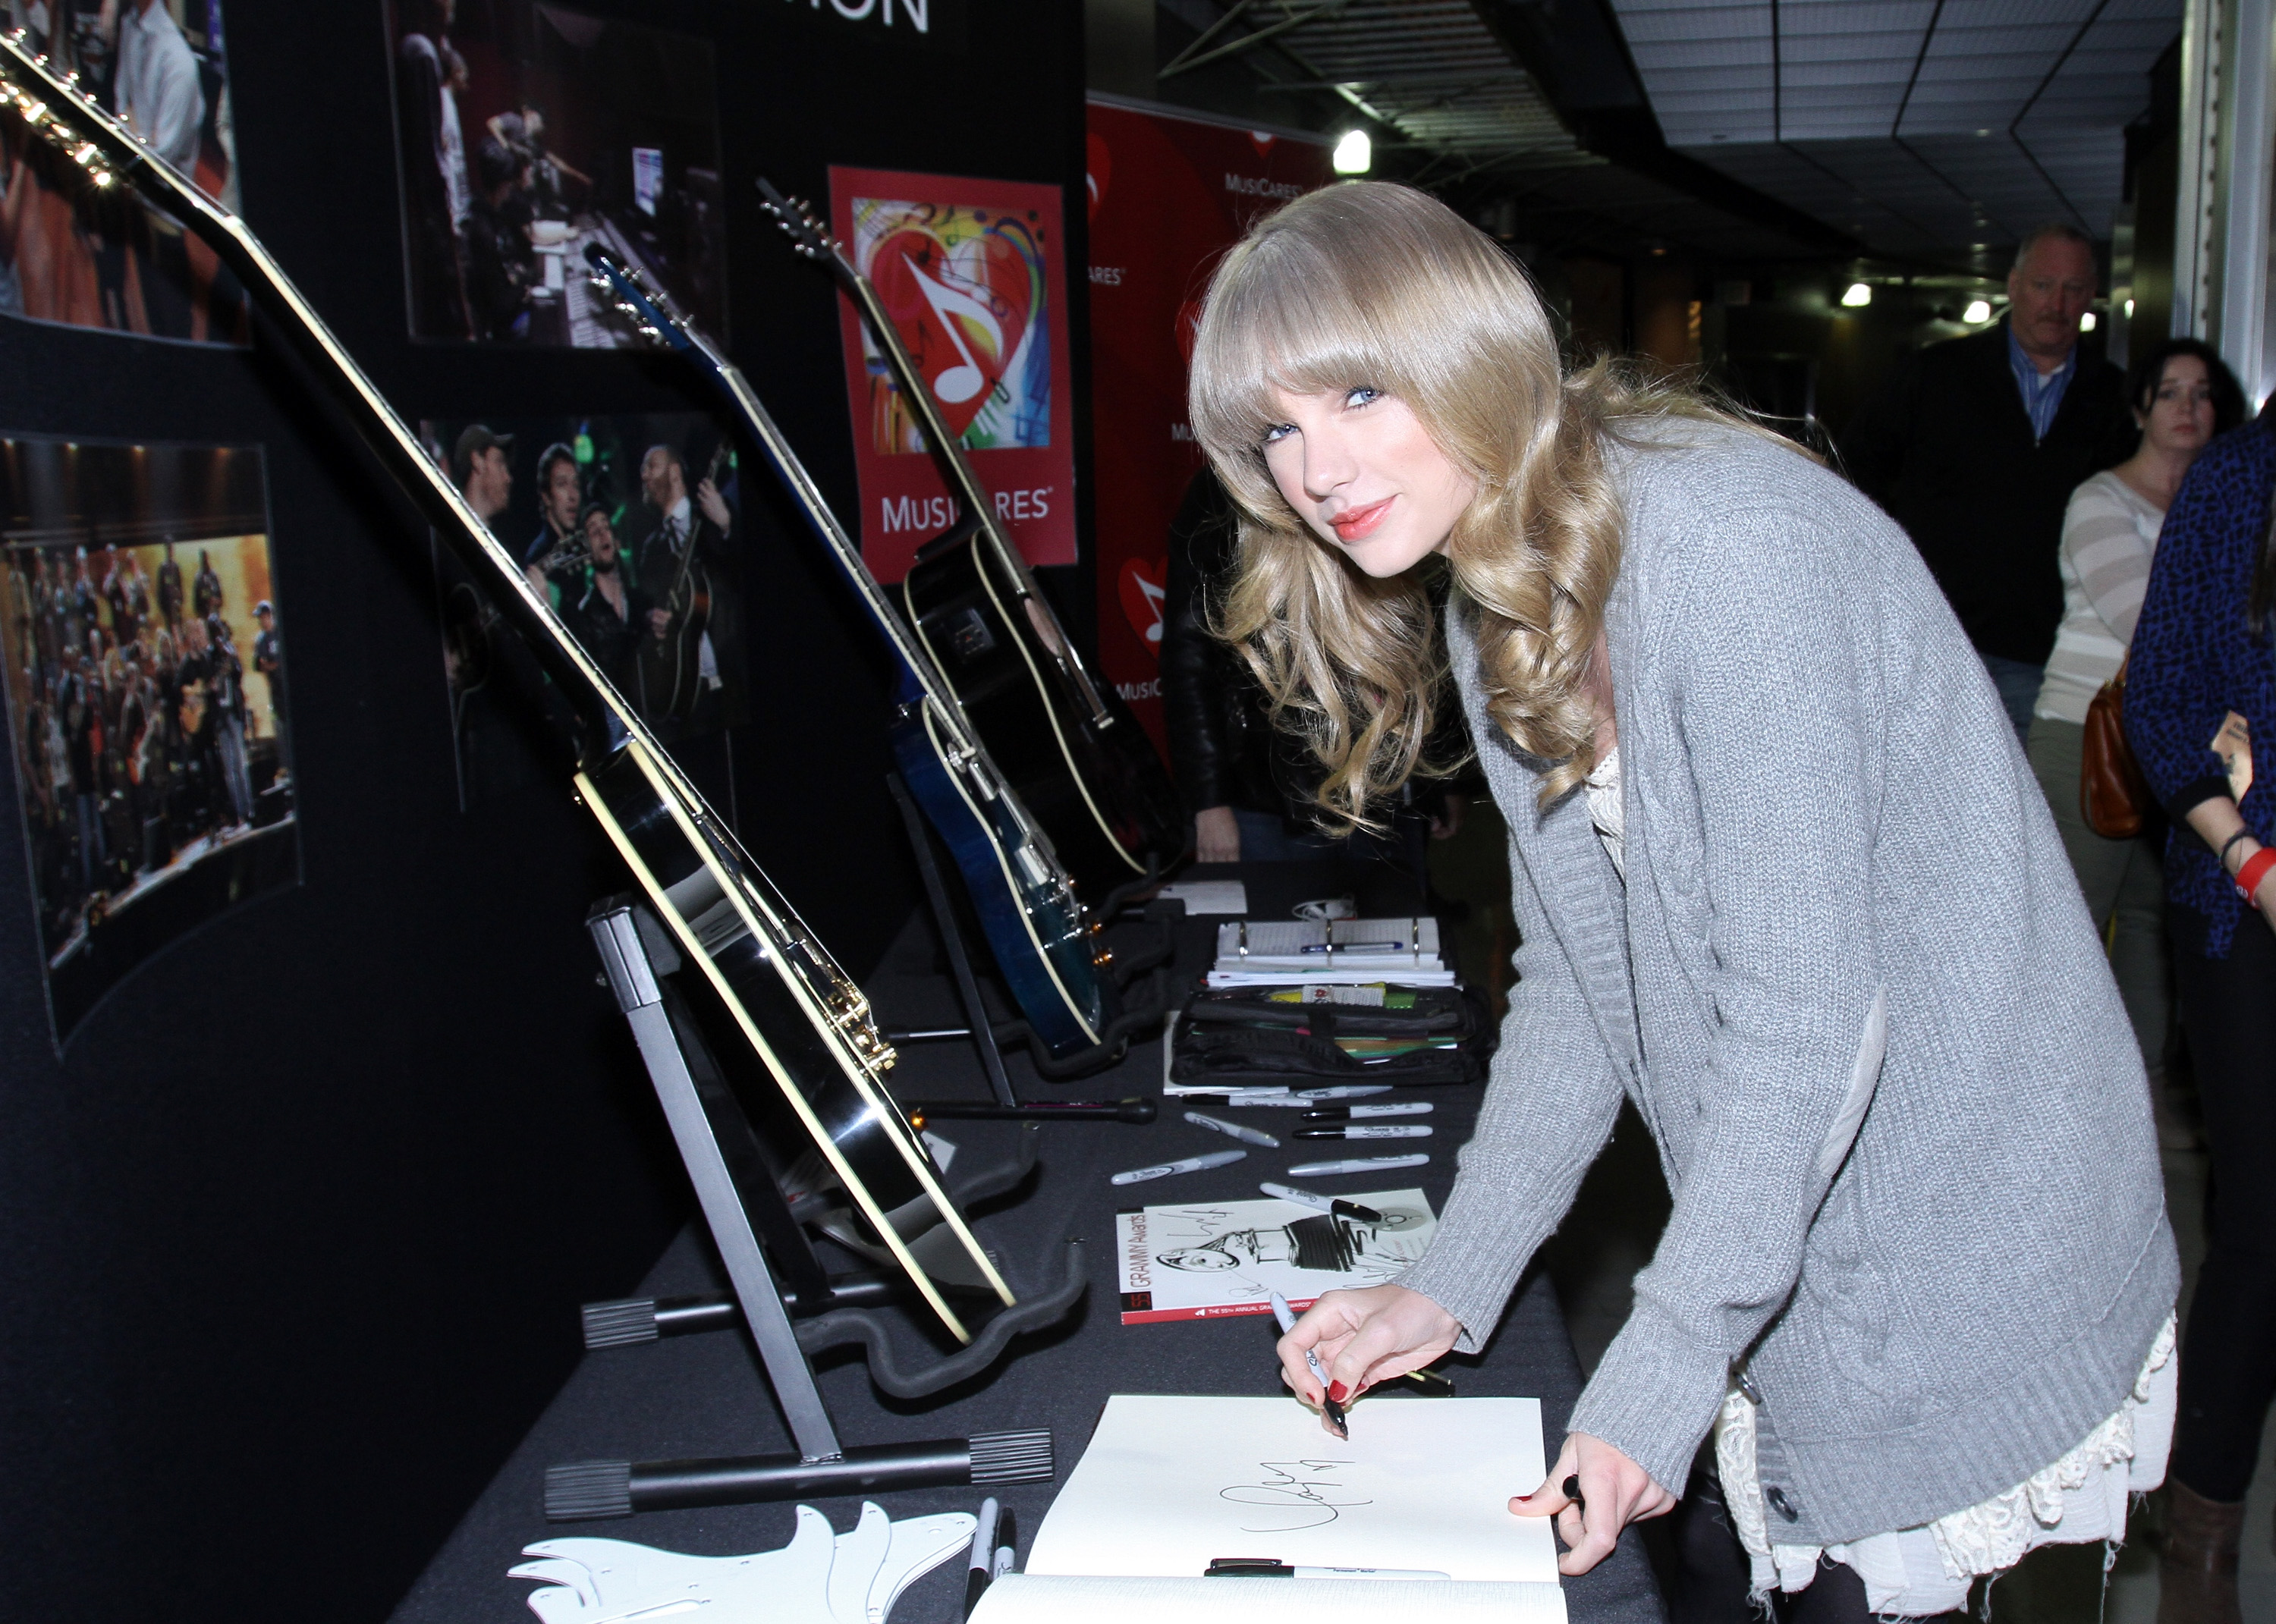 http://www.taylorpictures.net/albums/app/2013/grammycharitiessignings/002.jpg